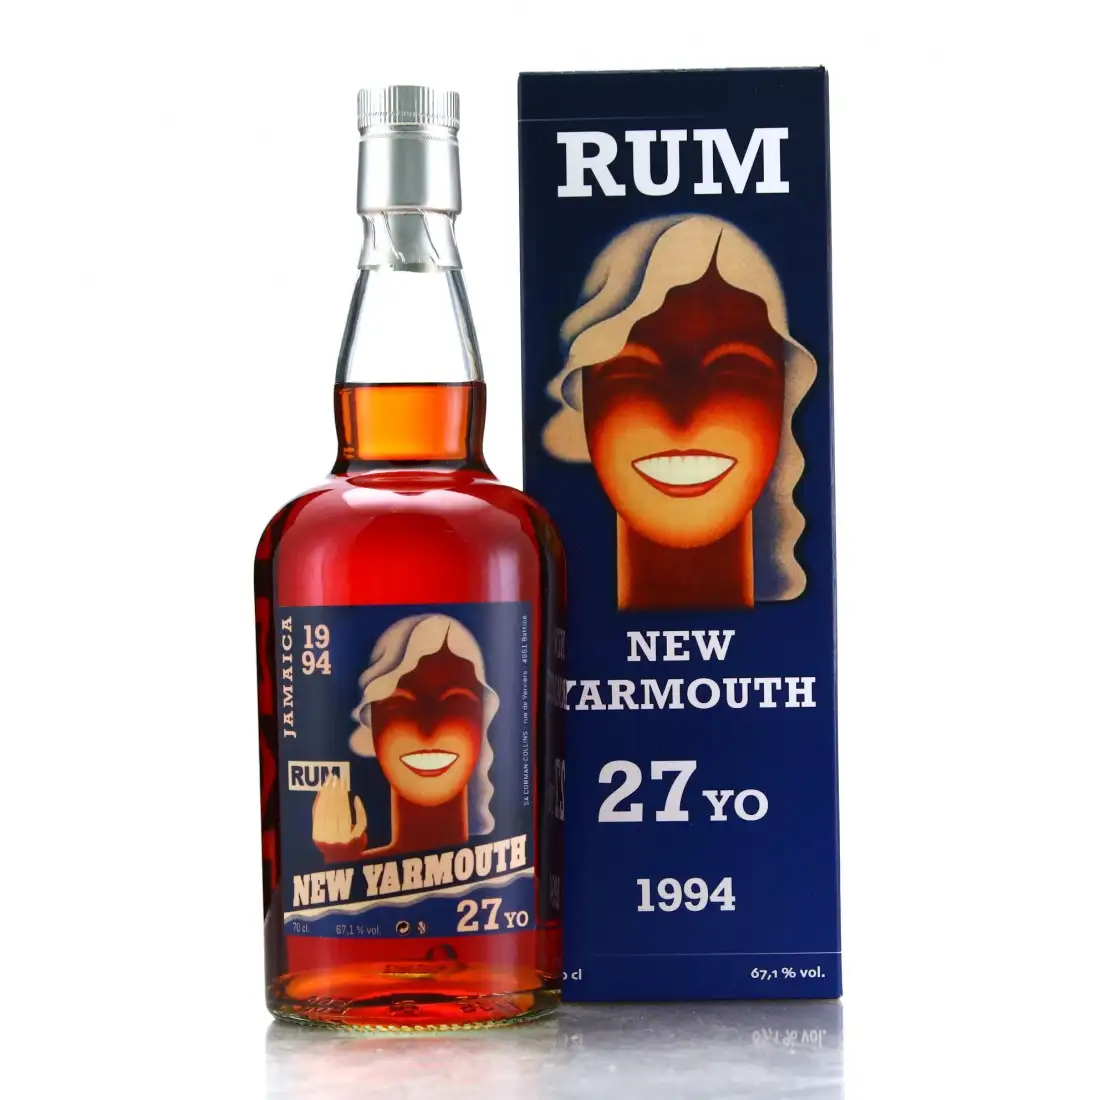 Image of the front of the bottle of the rum Rum New Yarmouth (The Auld Alliance)